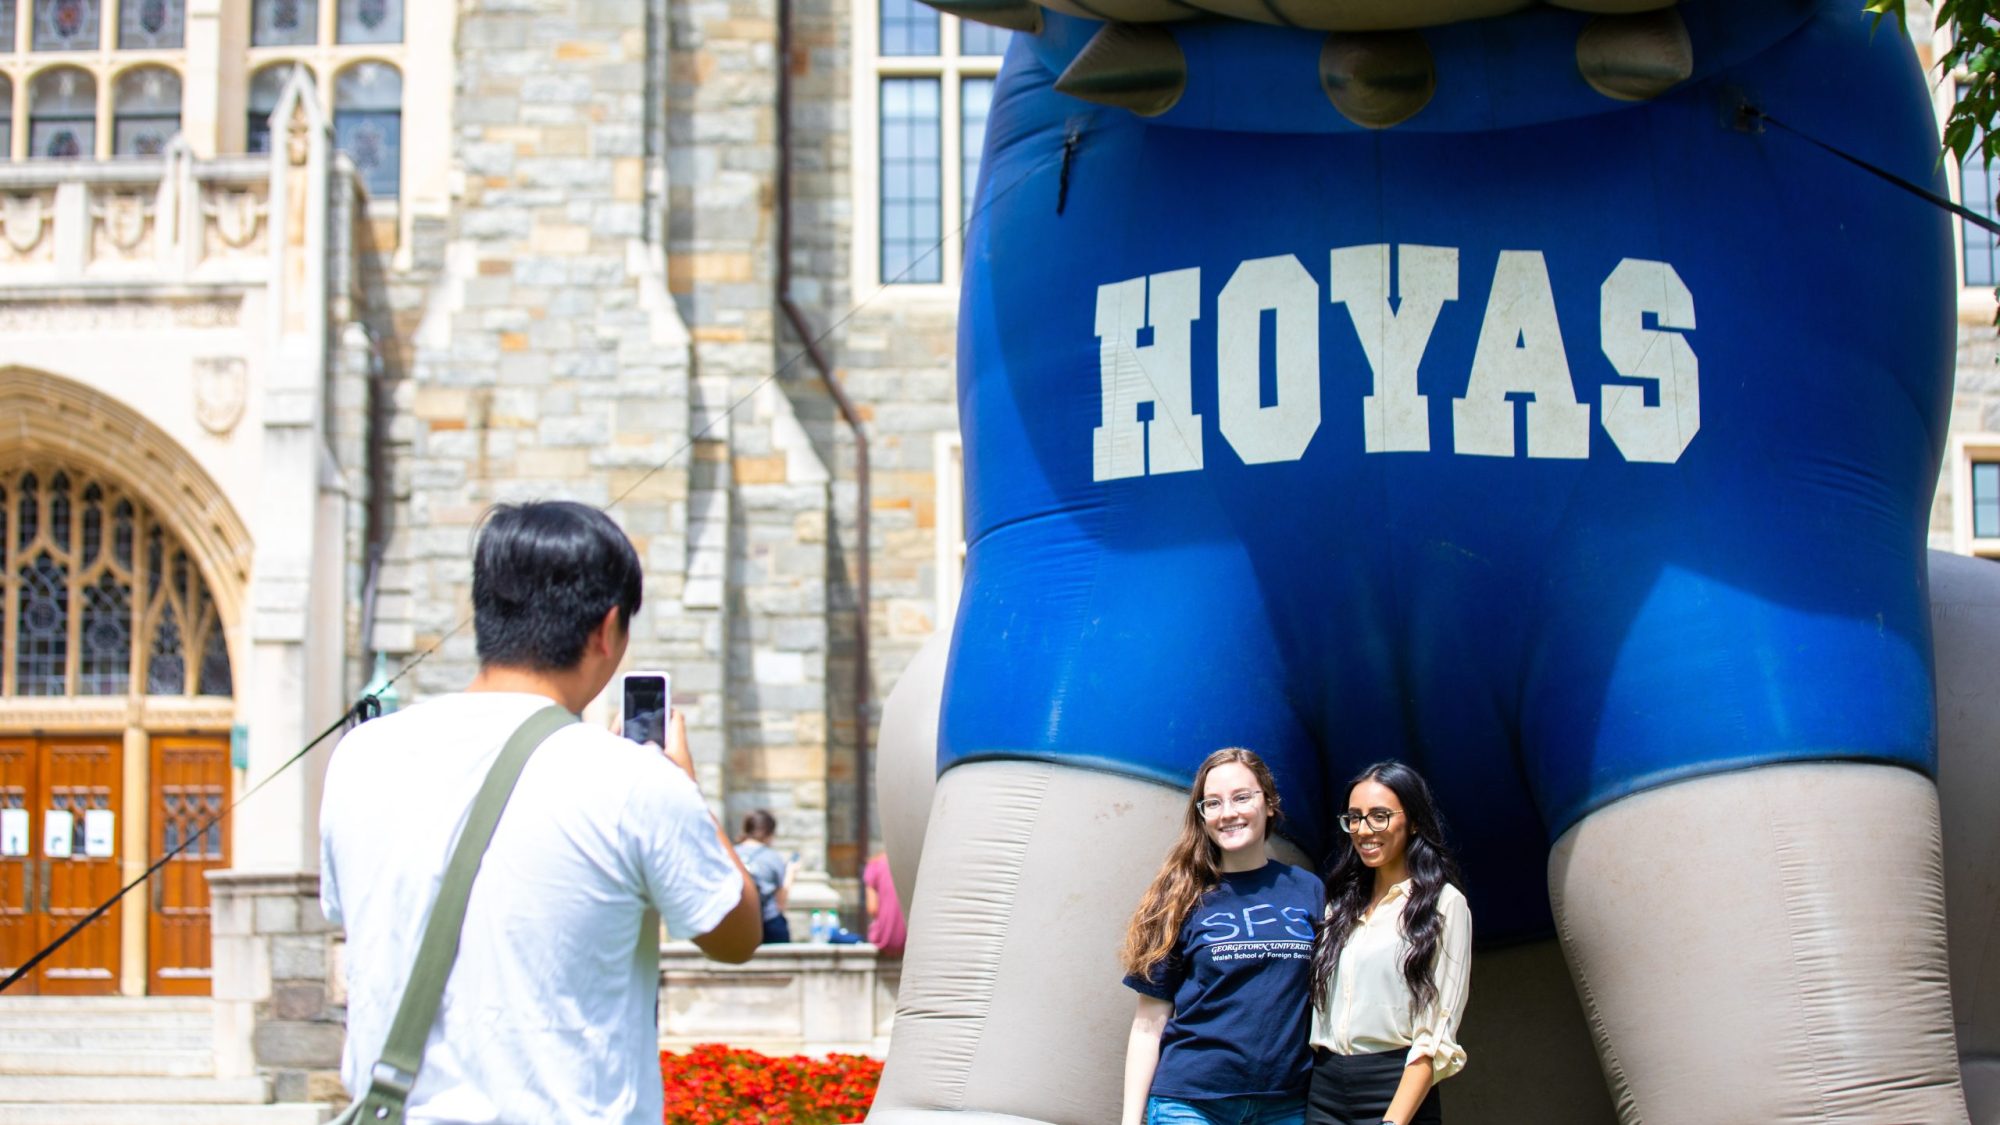 A person takes a photo of two students in front of the blowup Jack the Bulldog